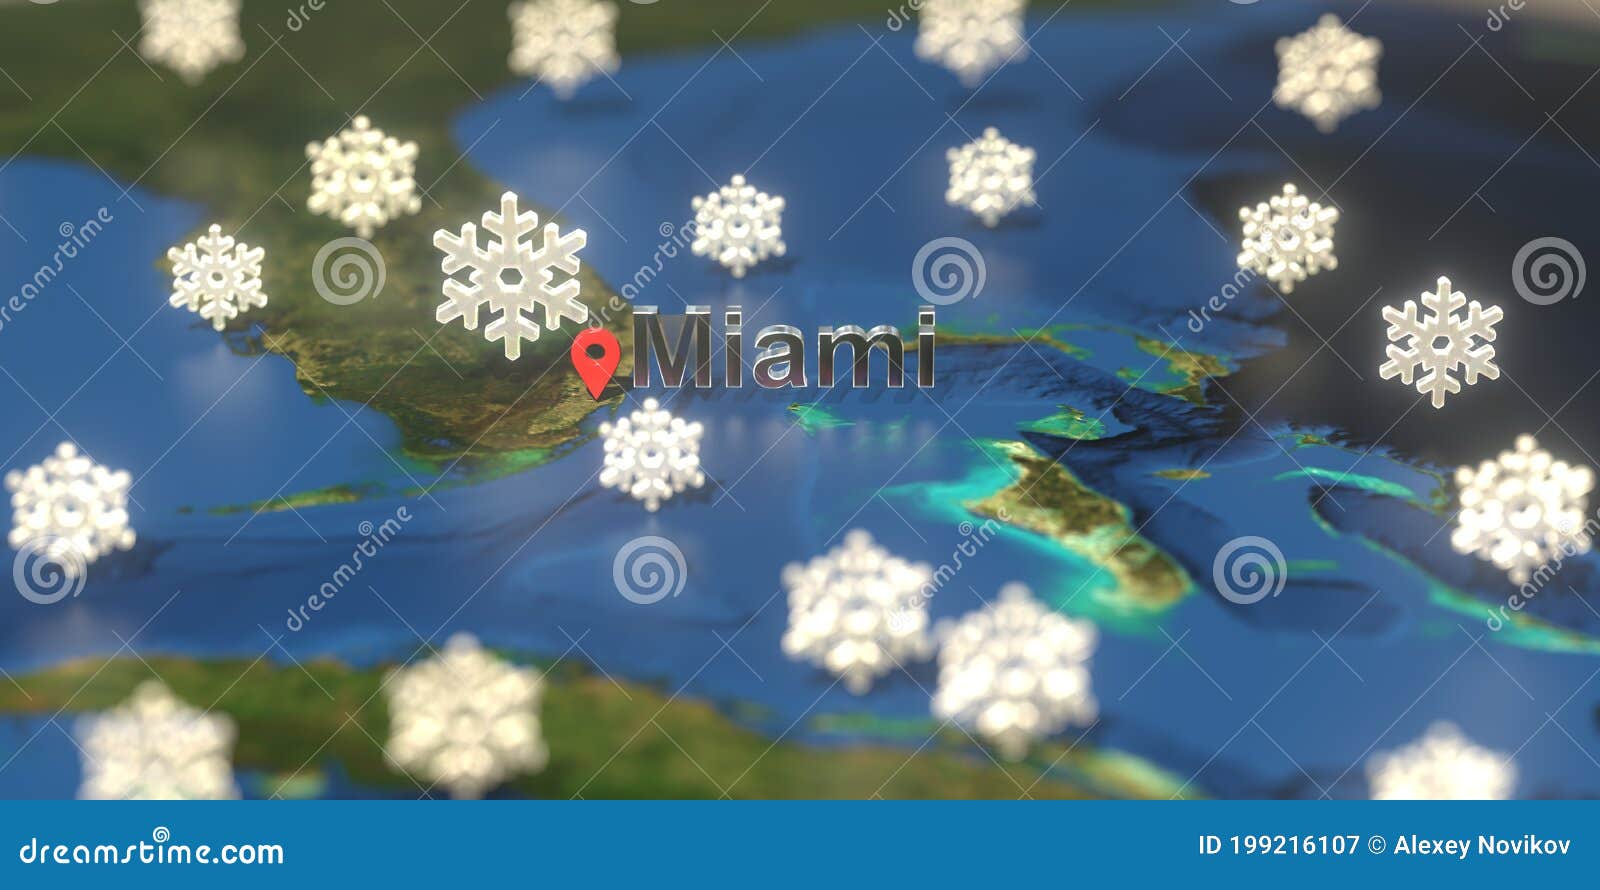 Miami City and Snowy Weather Icon on the Map, Weather Forecast Related